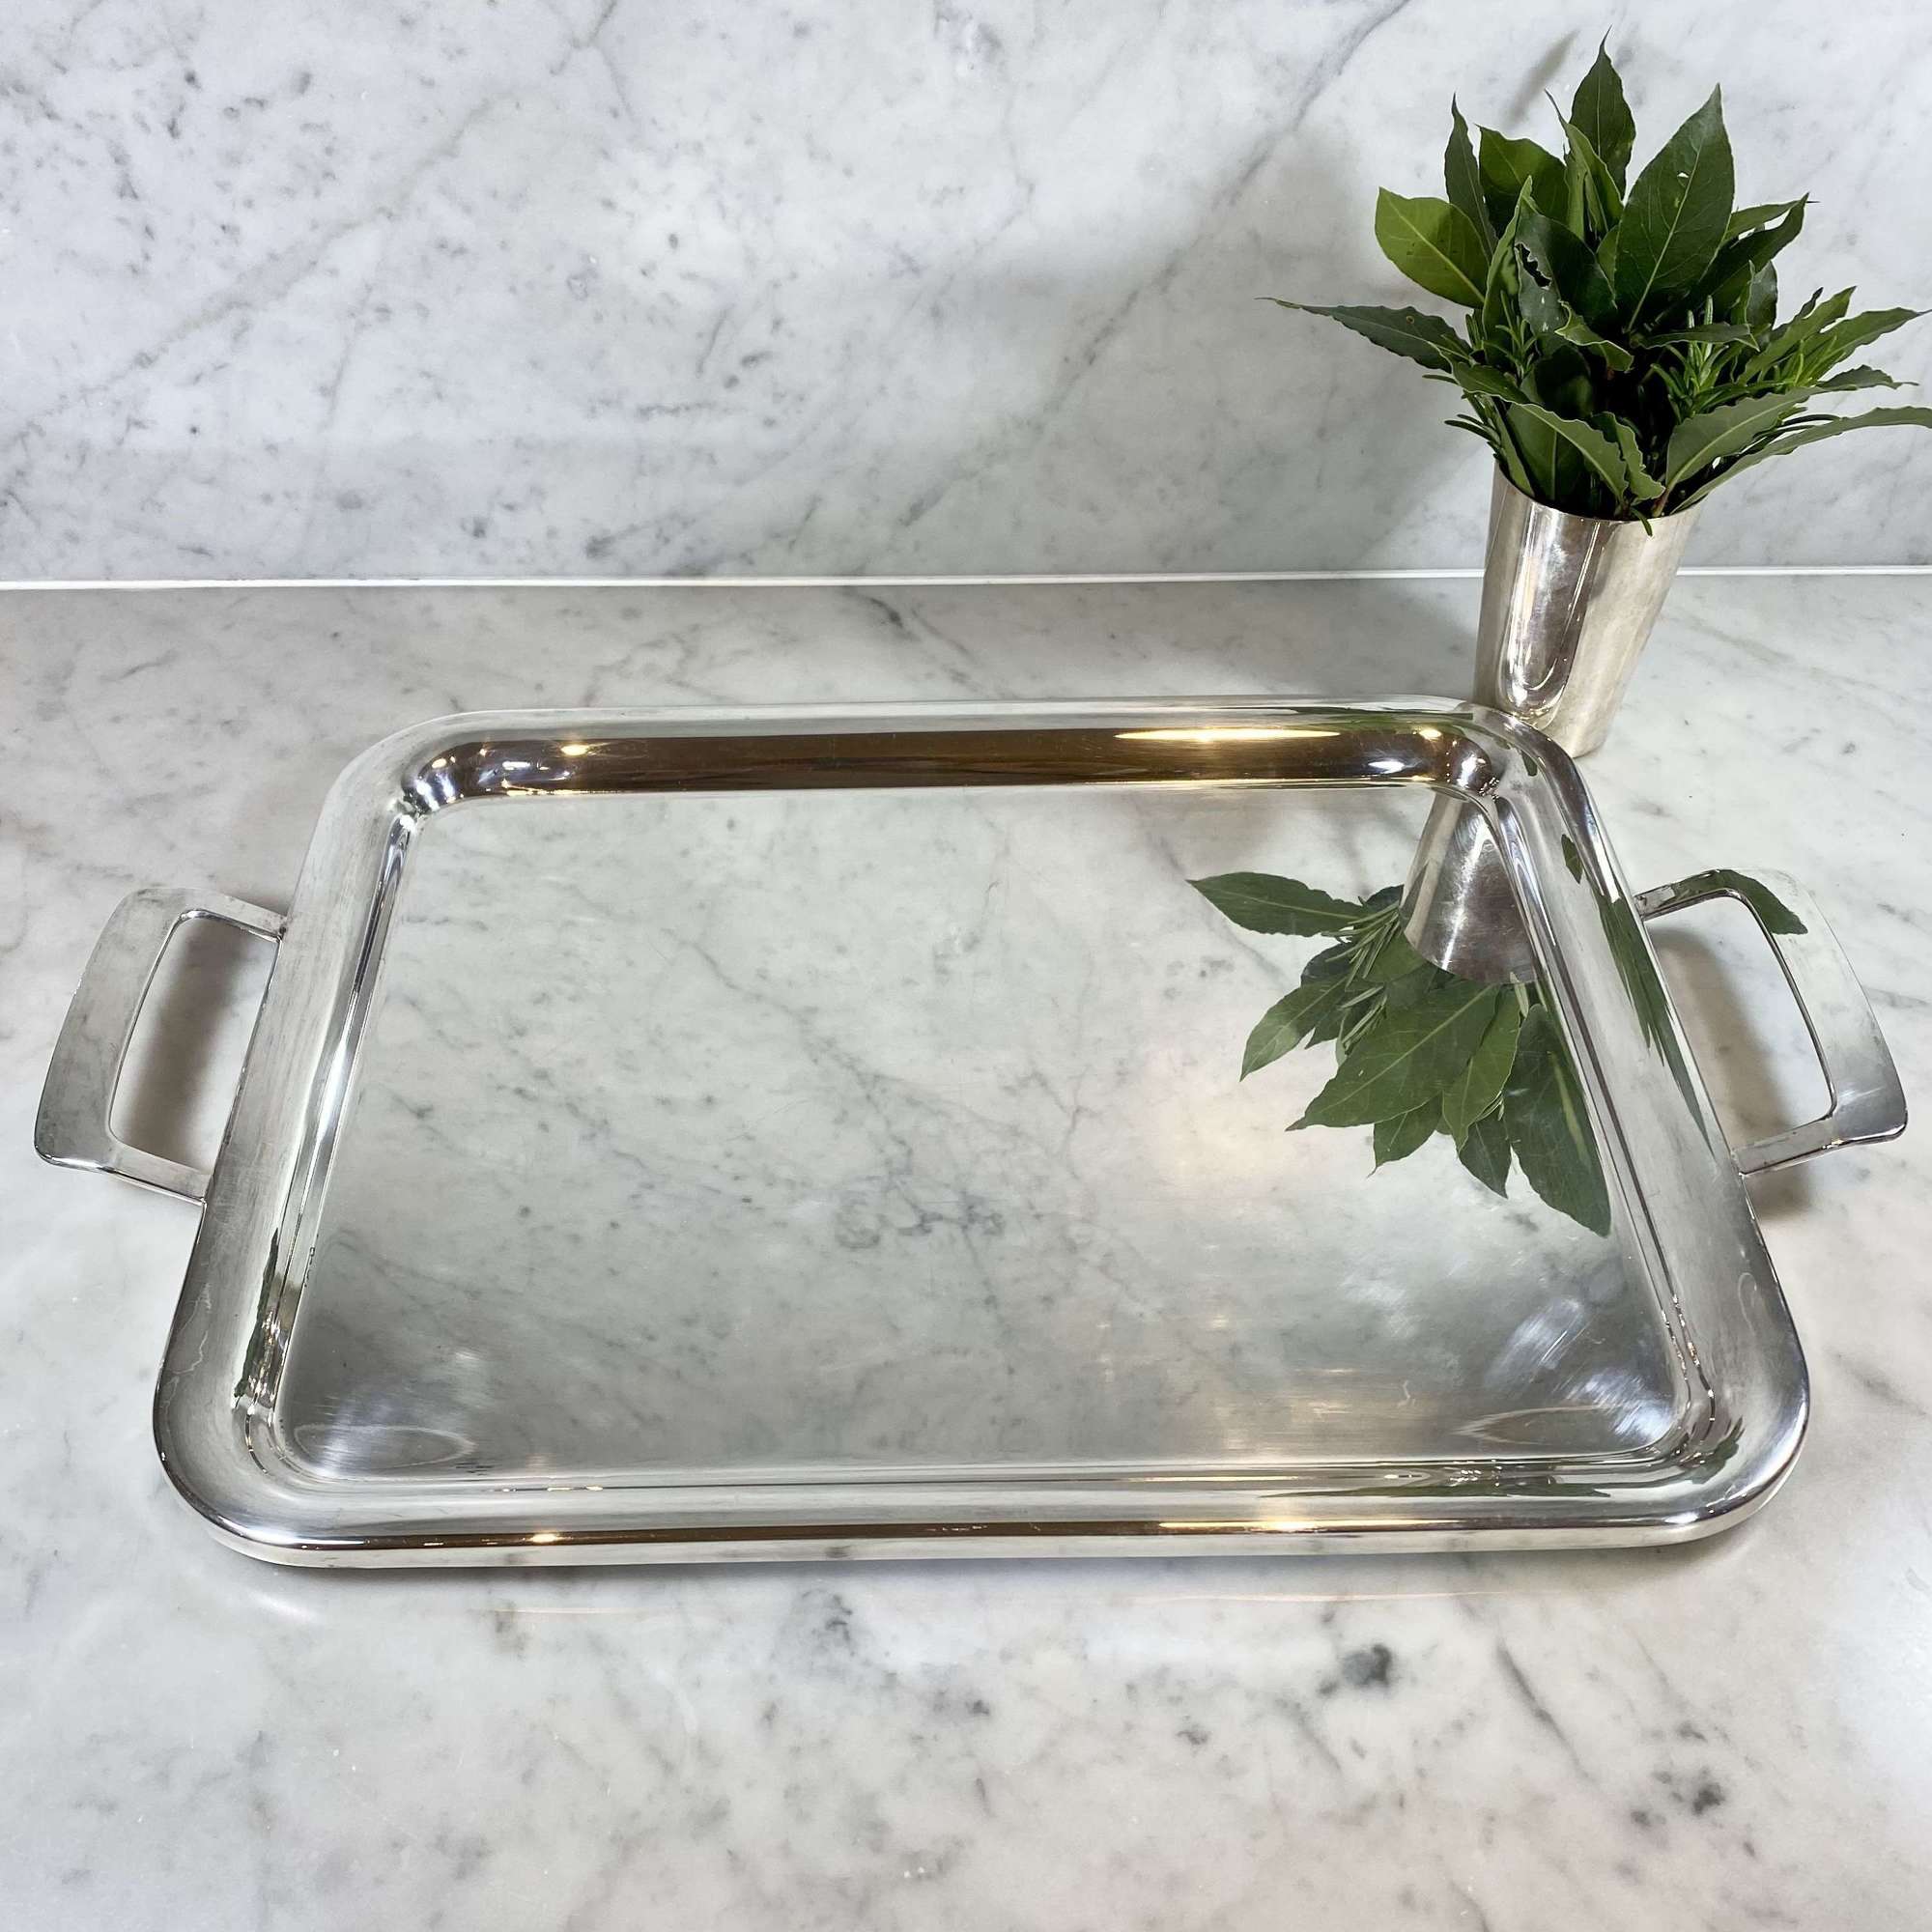 Good quality medium sized Mid 20th Century silver plated serving tray